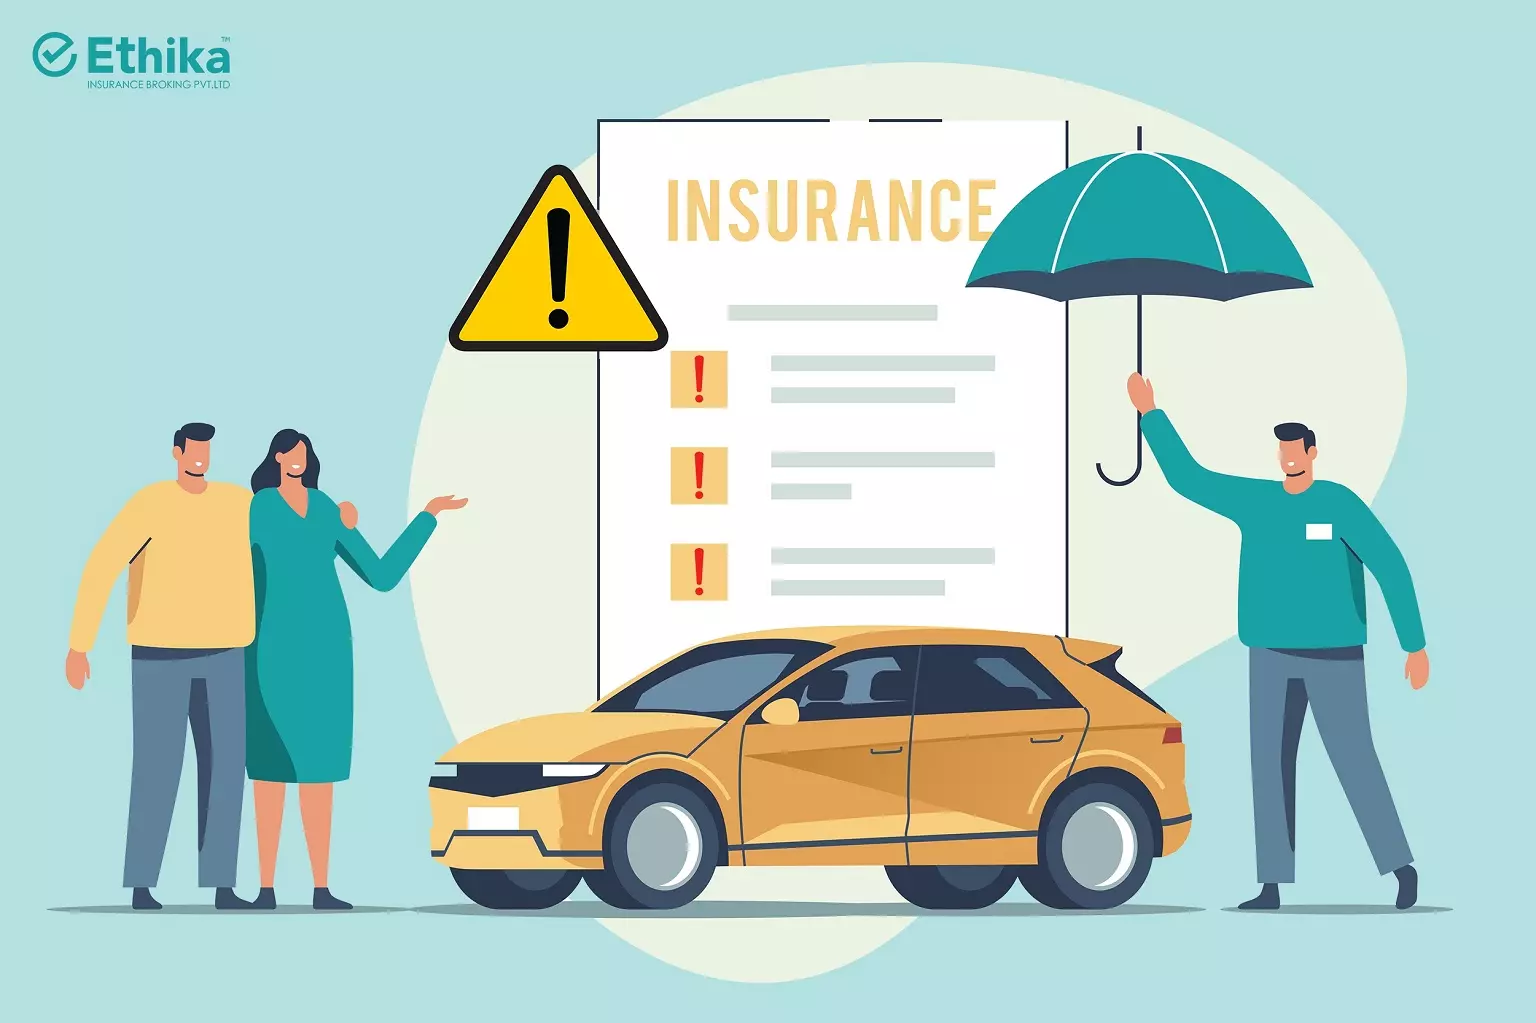 Common Mistakes to Avoid When Buying Vehicle Insurance